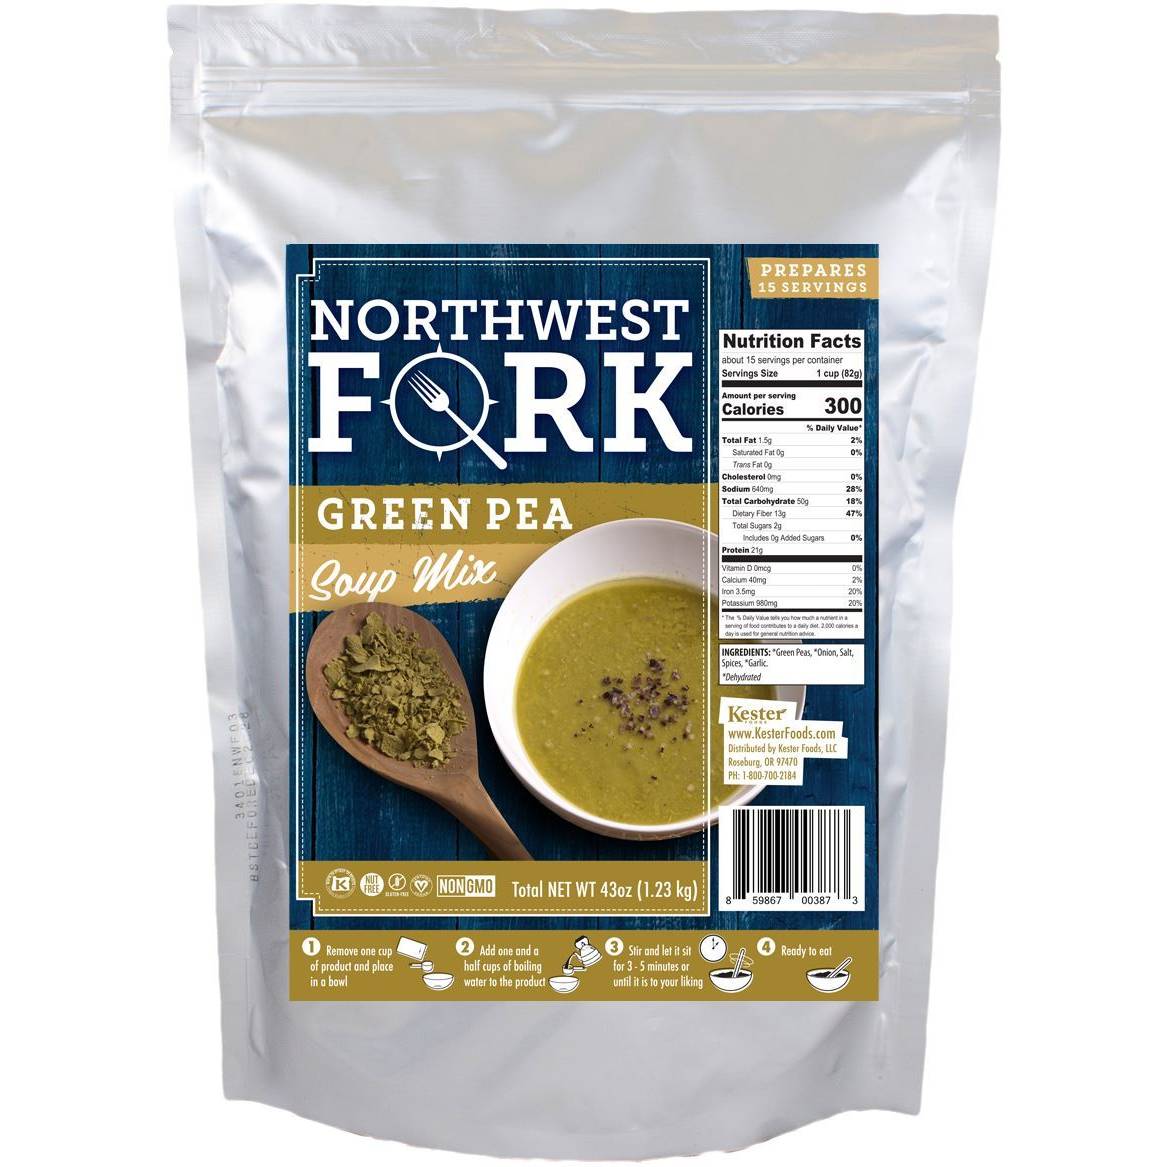 NorthWest Fork Green Pea Soup Mix